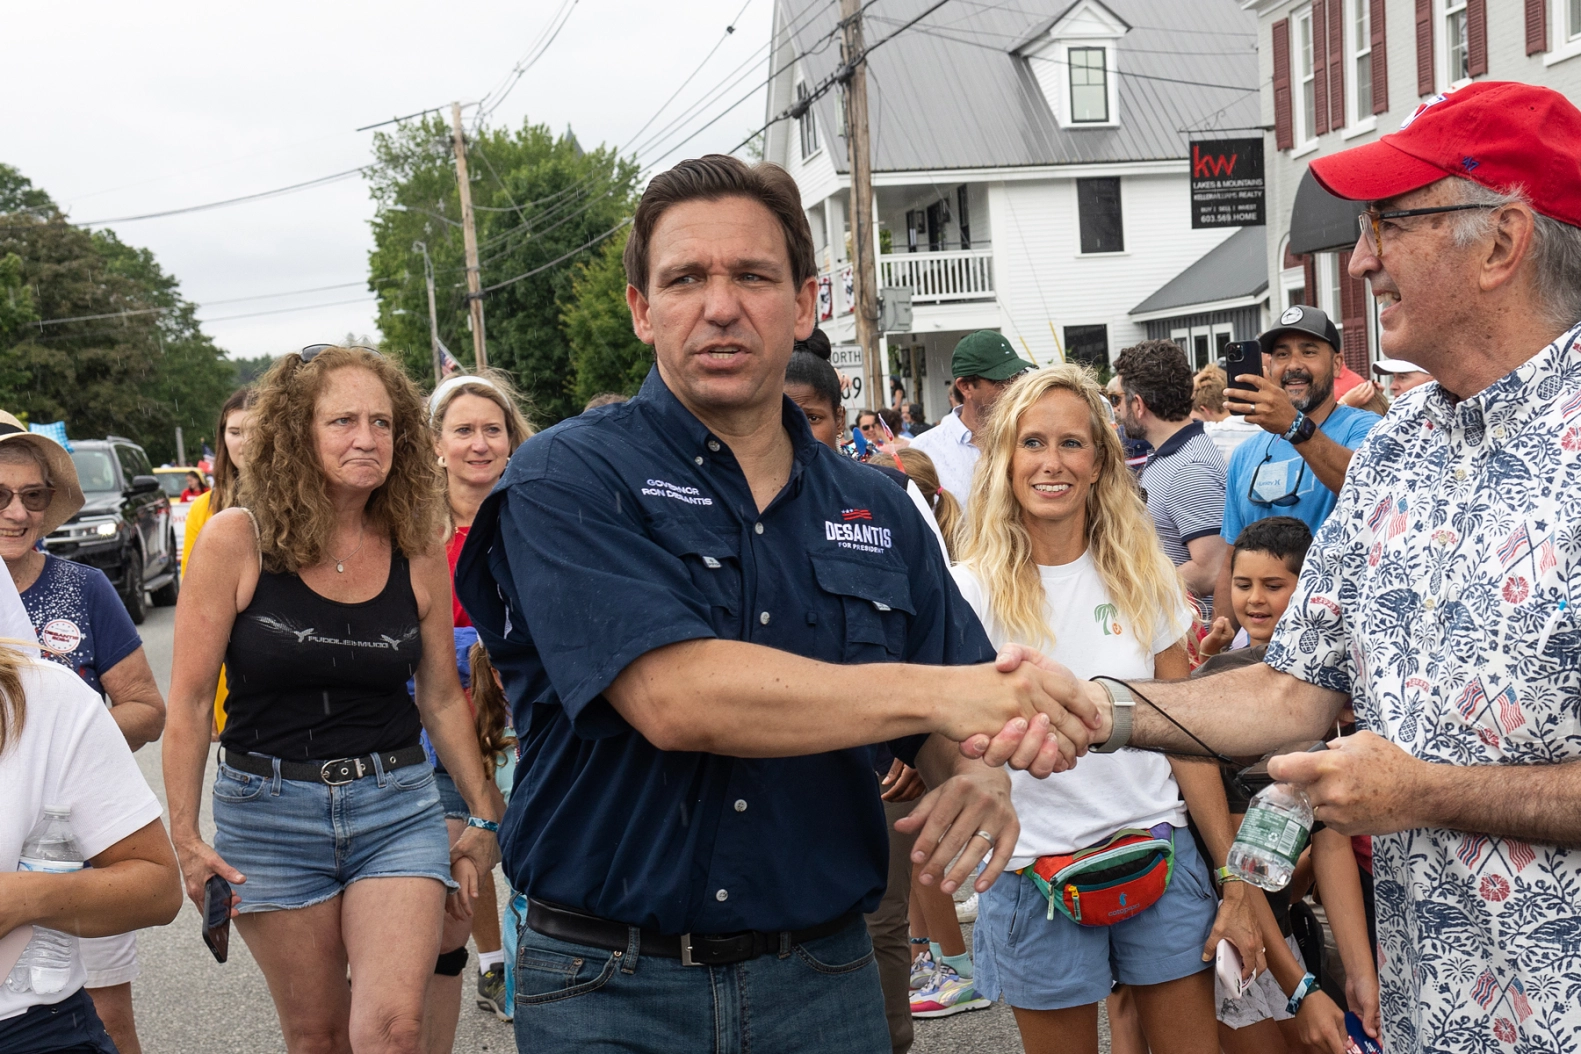 Republican presidential candidate, Florida Governor Ron DeSantis, joined by his wife Casey and their children, greets residents at a Fourth of July parade on July 4, 2023, in Wolfeboro, New Hampshire. DeSantis is trying to make up ground on former President Donald Trump, who is currently the clear Republican front-runner. 